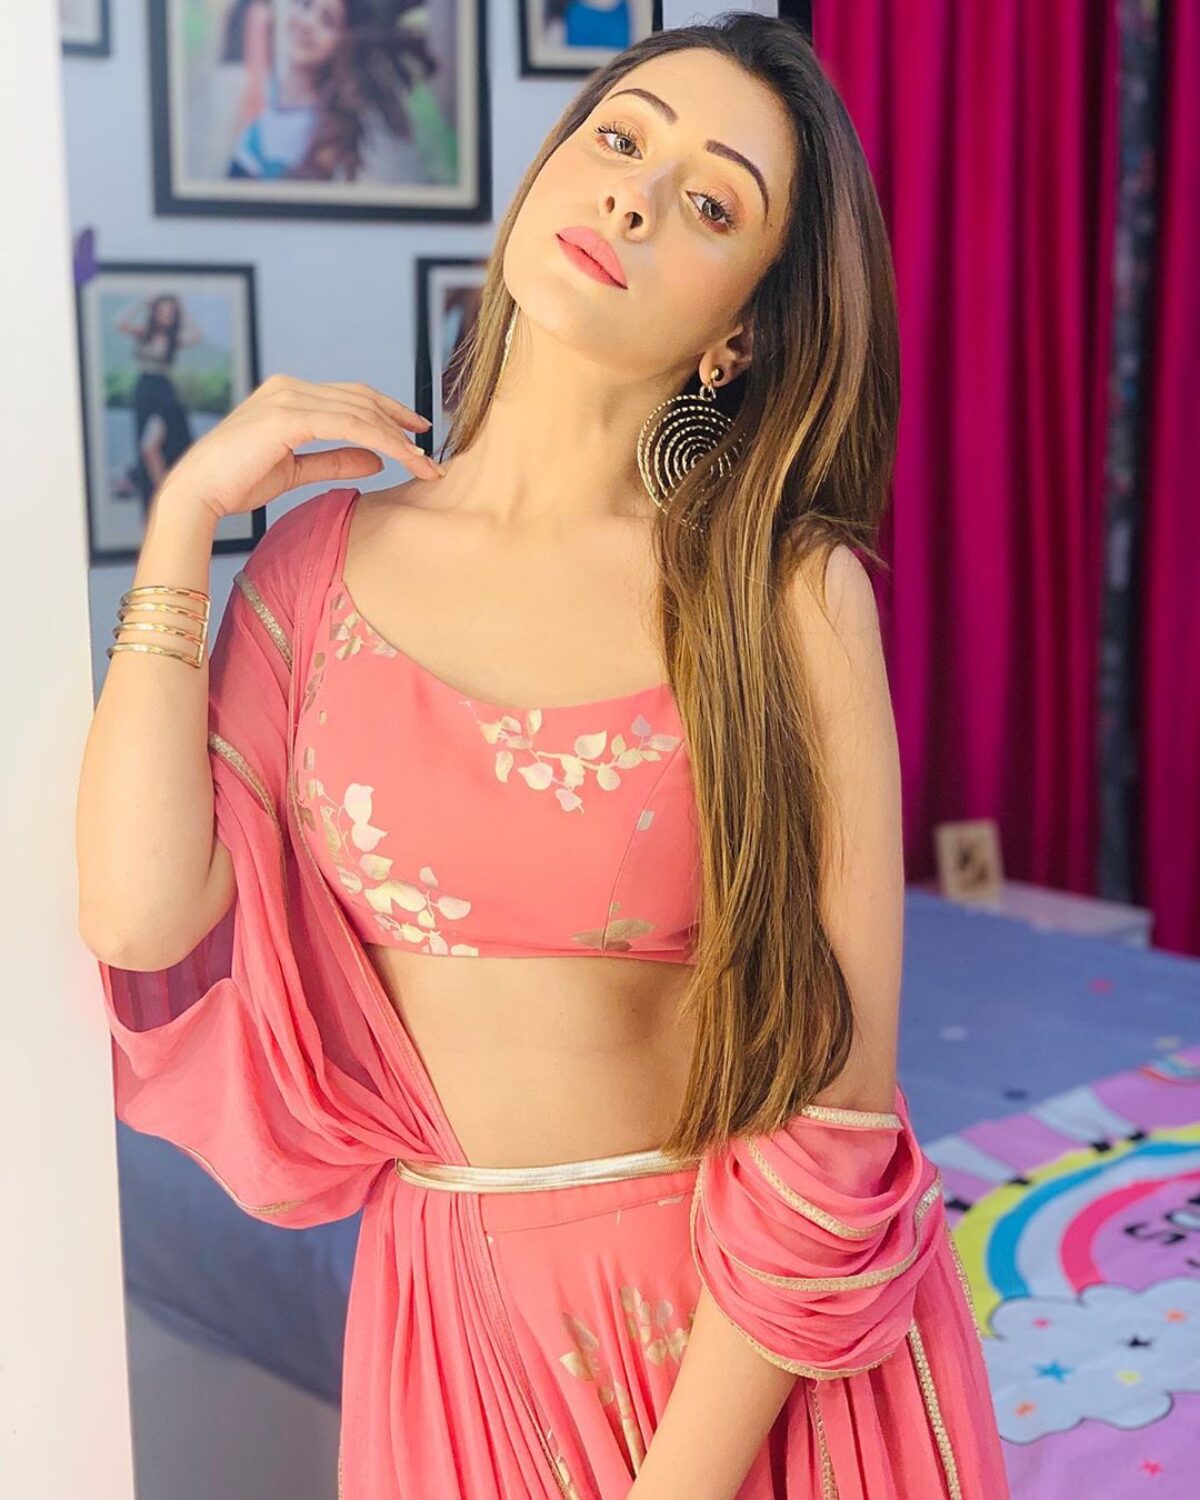 Hiba Nawab latests photos are here to brighten up your day - The Indian Wire